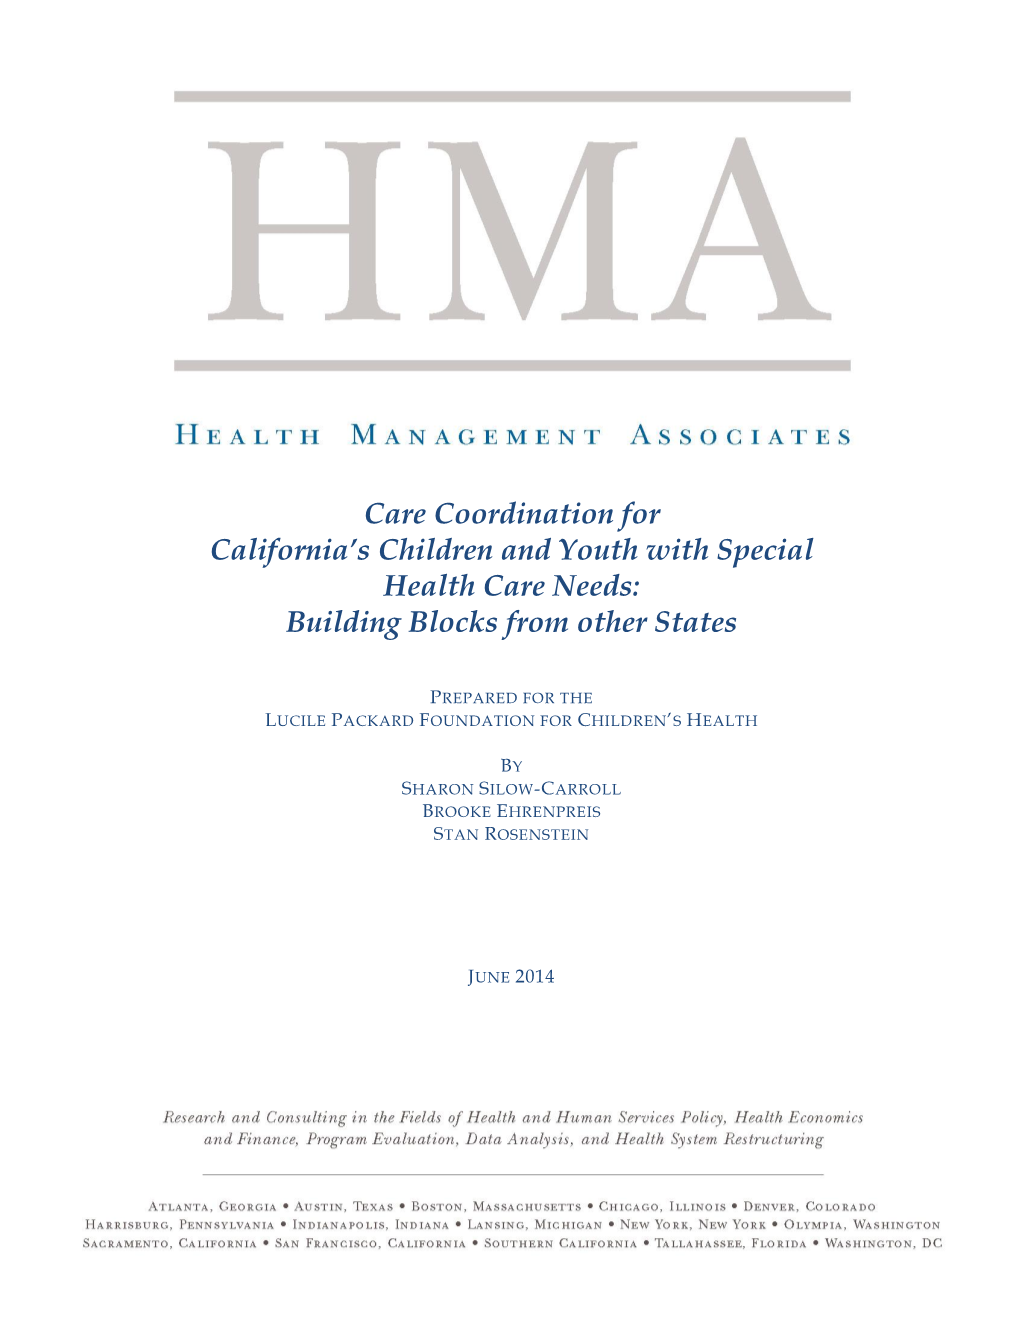 Care Coordination for California's